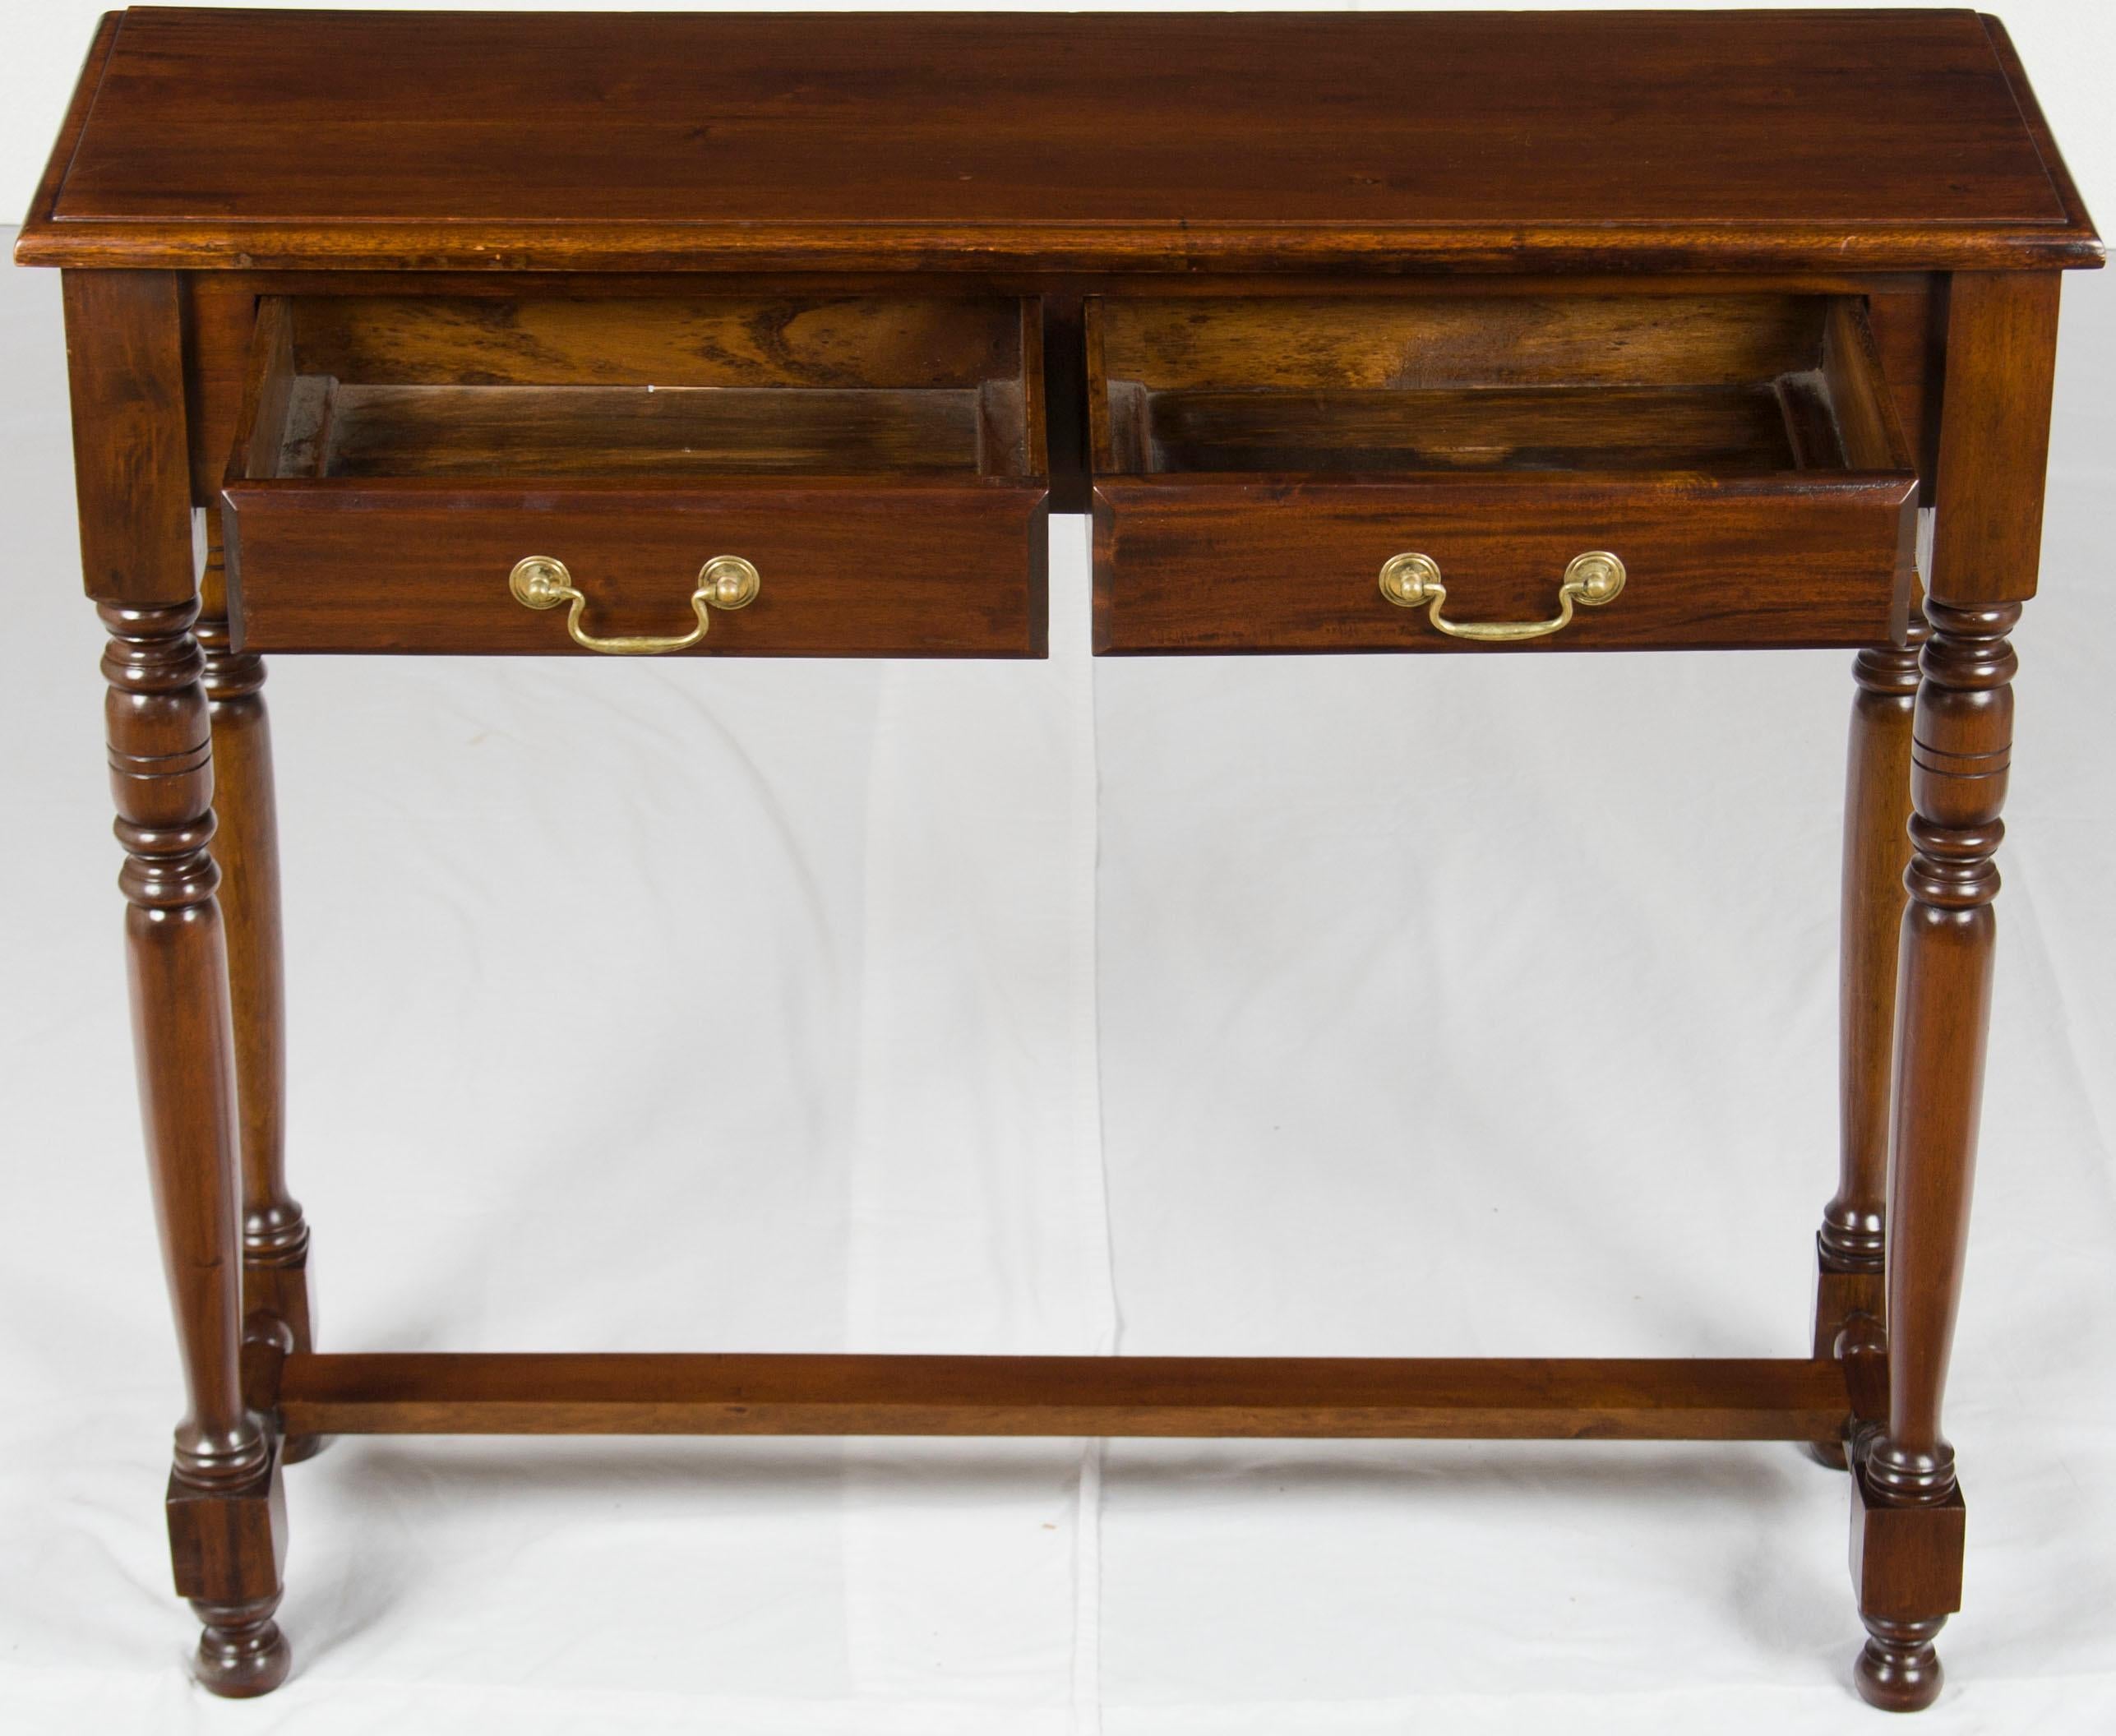 While this mahogany sofa table is simple, it does not lack character and charm. This piece is a very versatile size that can be used in many different rooms of the house. The original function would be to be used behind a sofa. Beyond that, it would